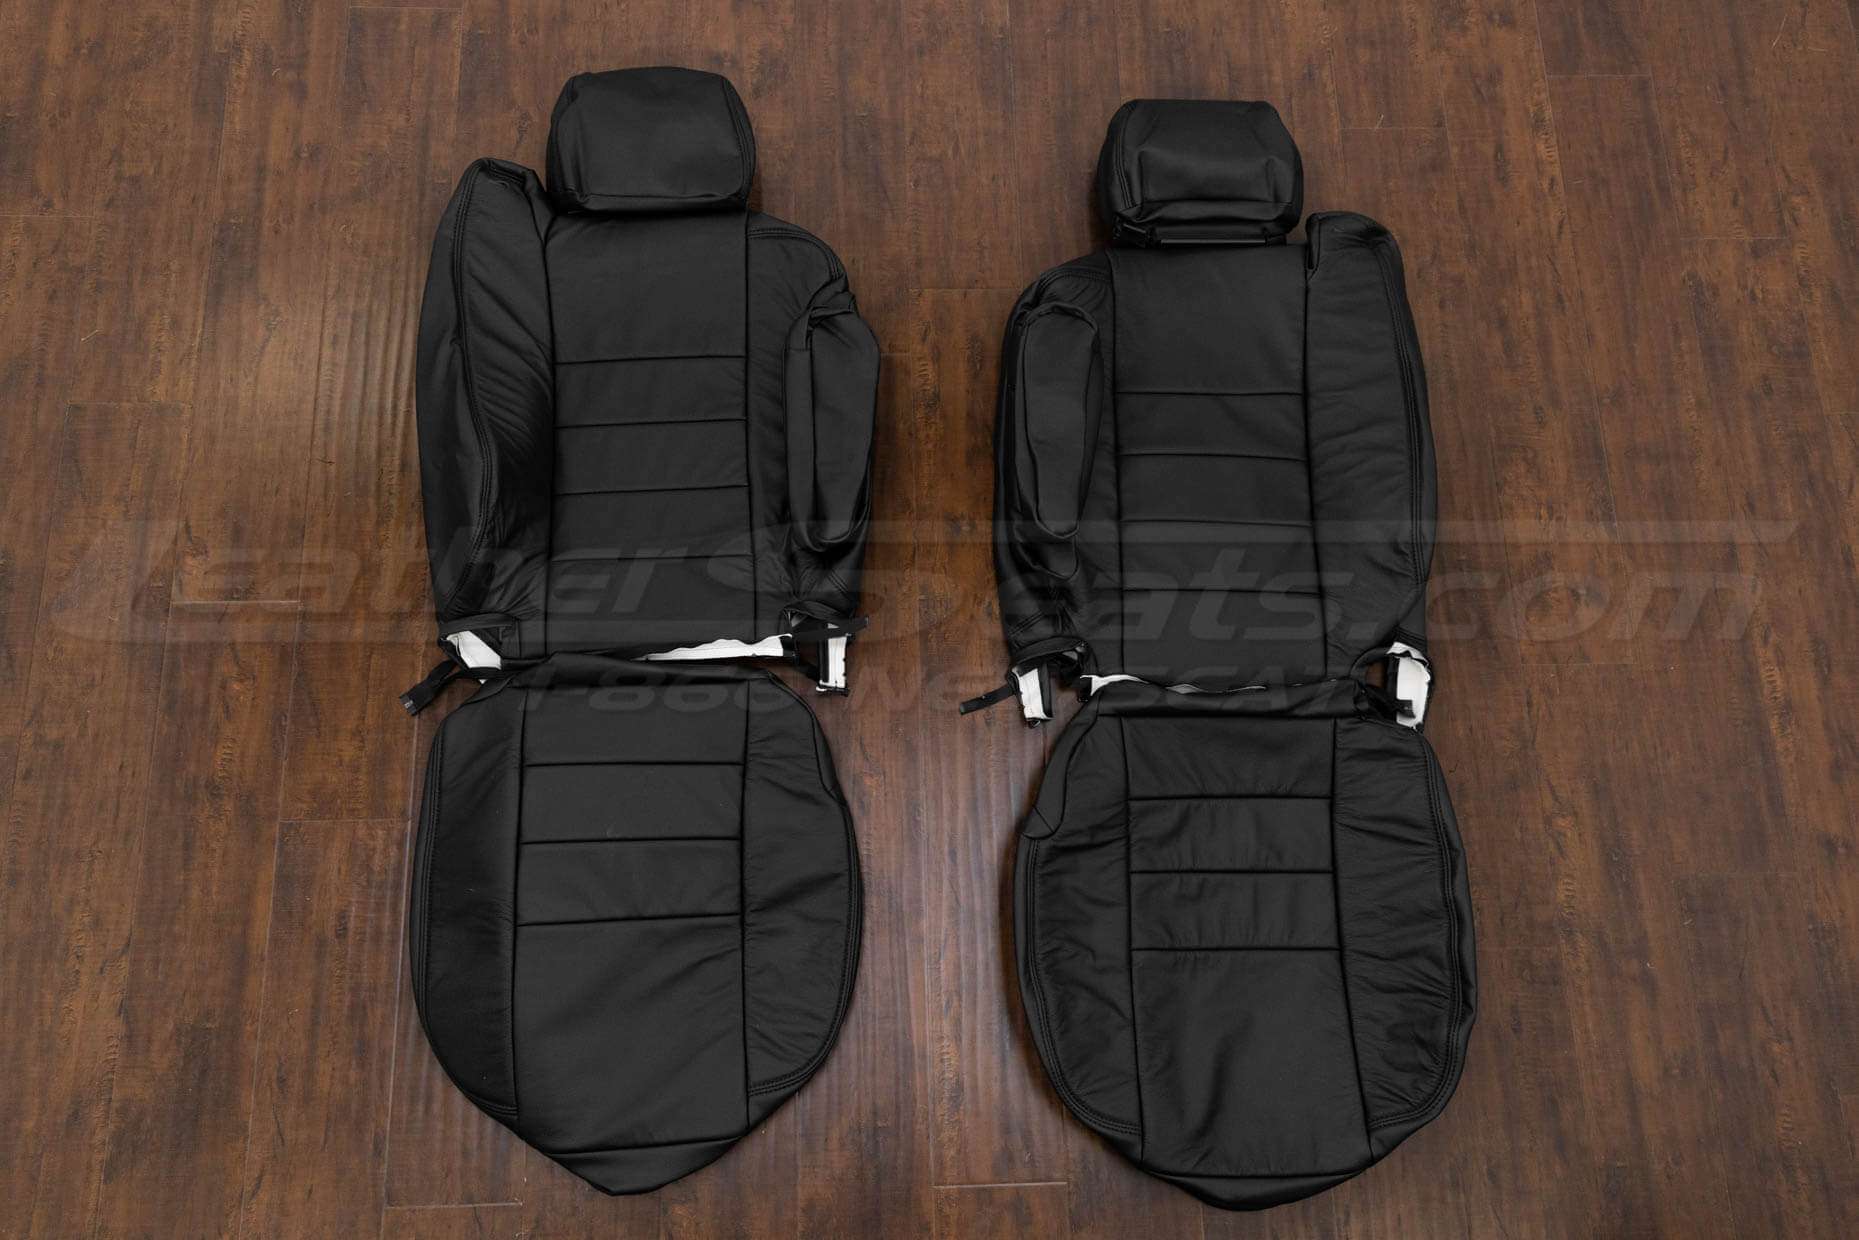 Hummer H2T Leather Seat Kit - Black - Front seat upholstery with Armrests